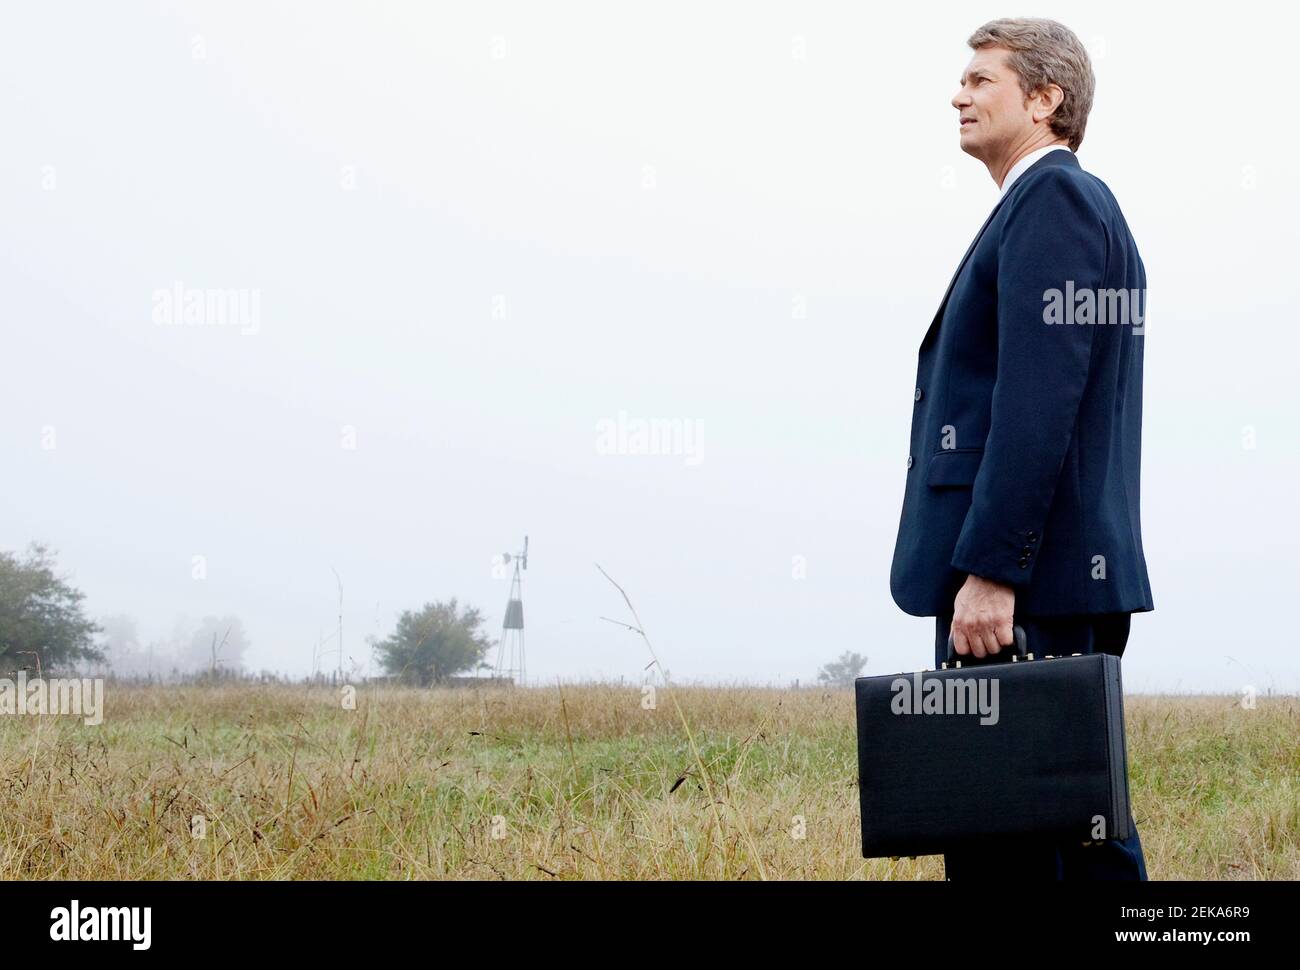 Businessman holding a briefcase and standing in a field Stock Photo